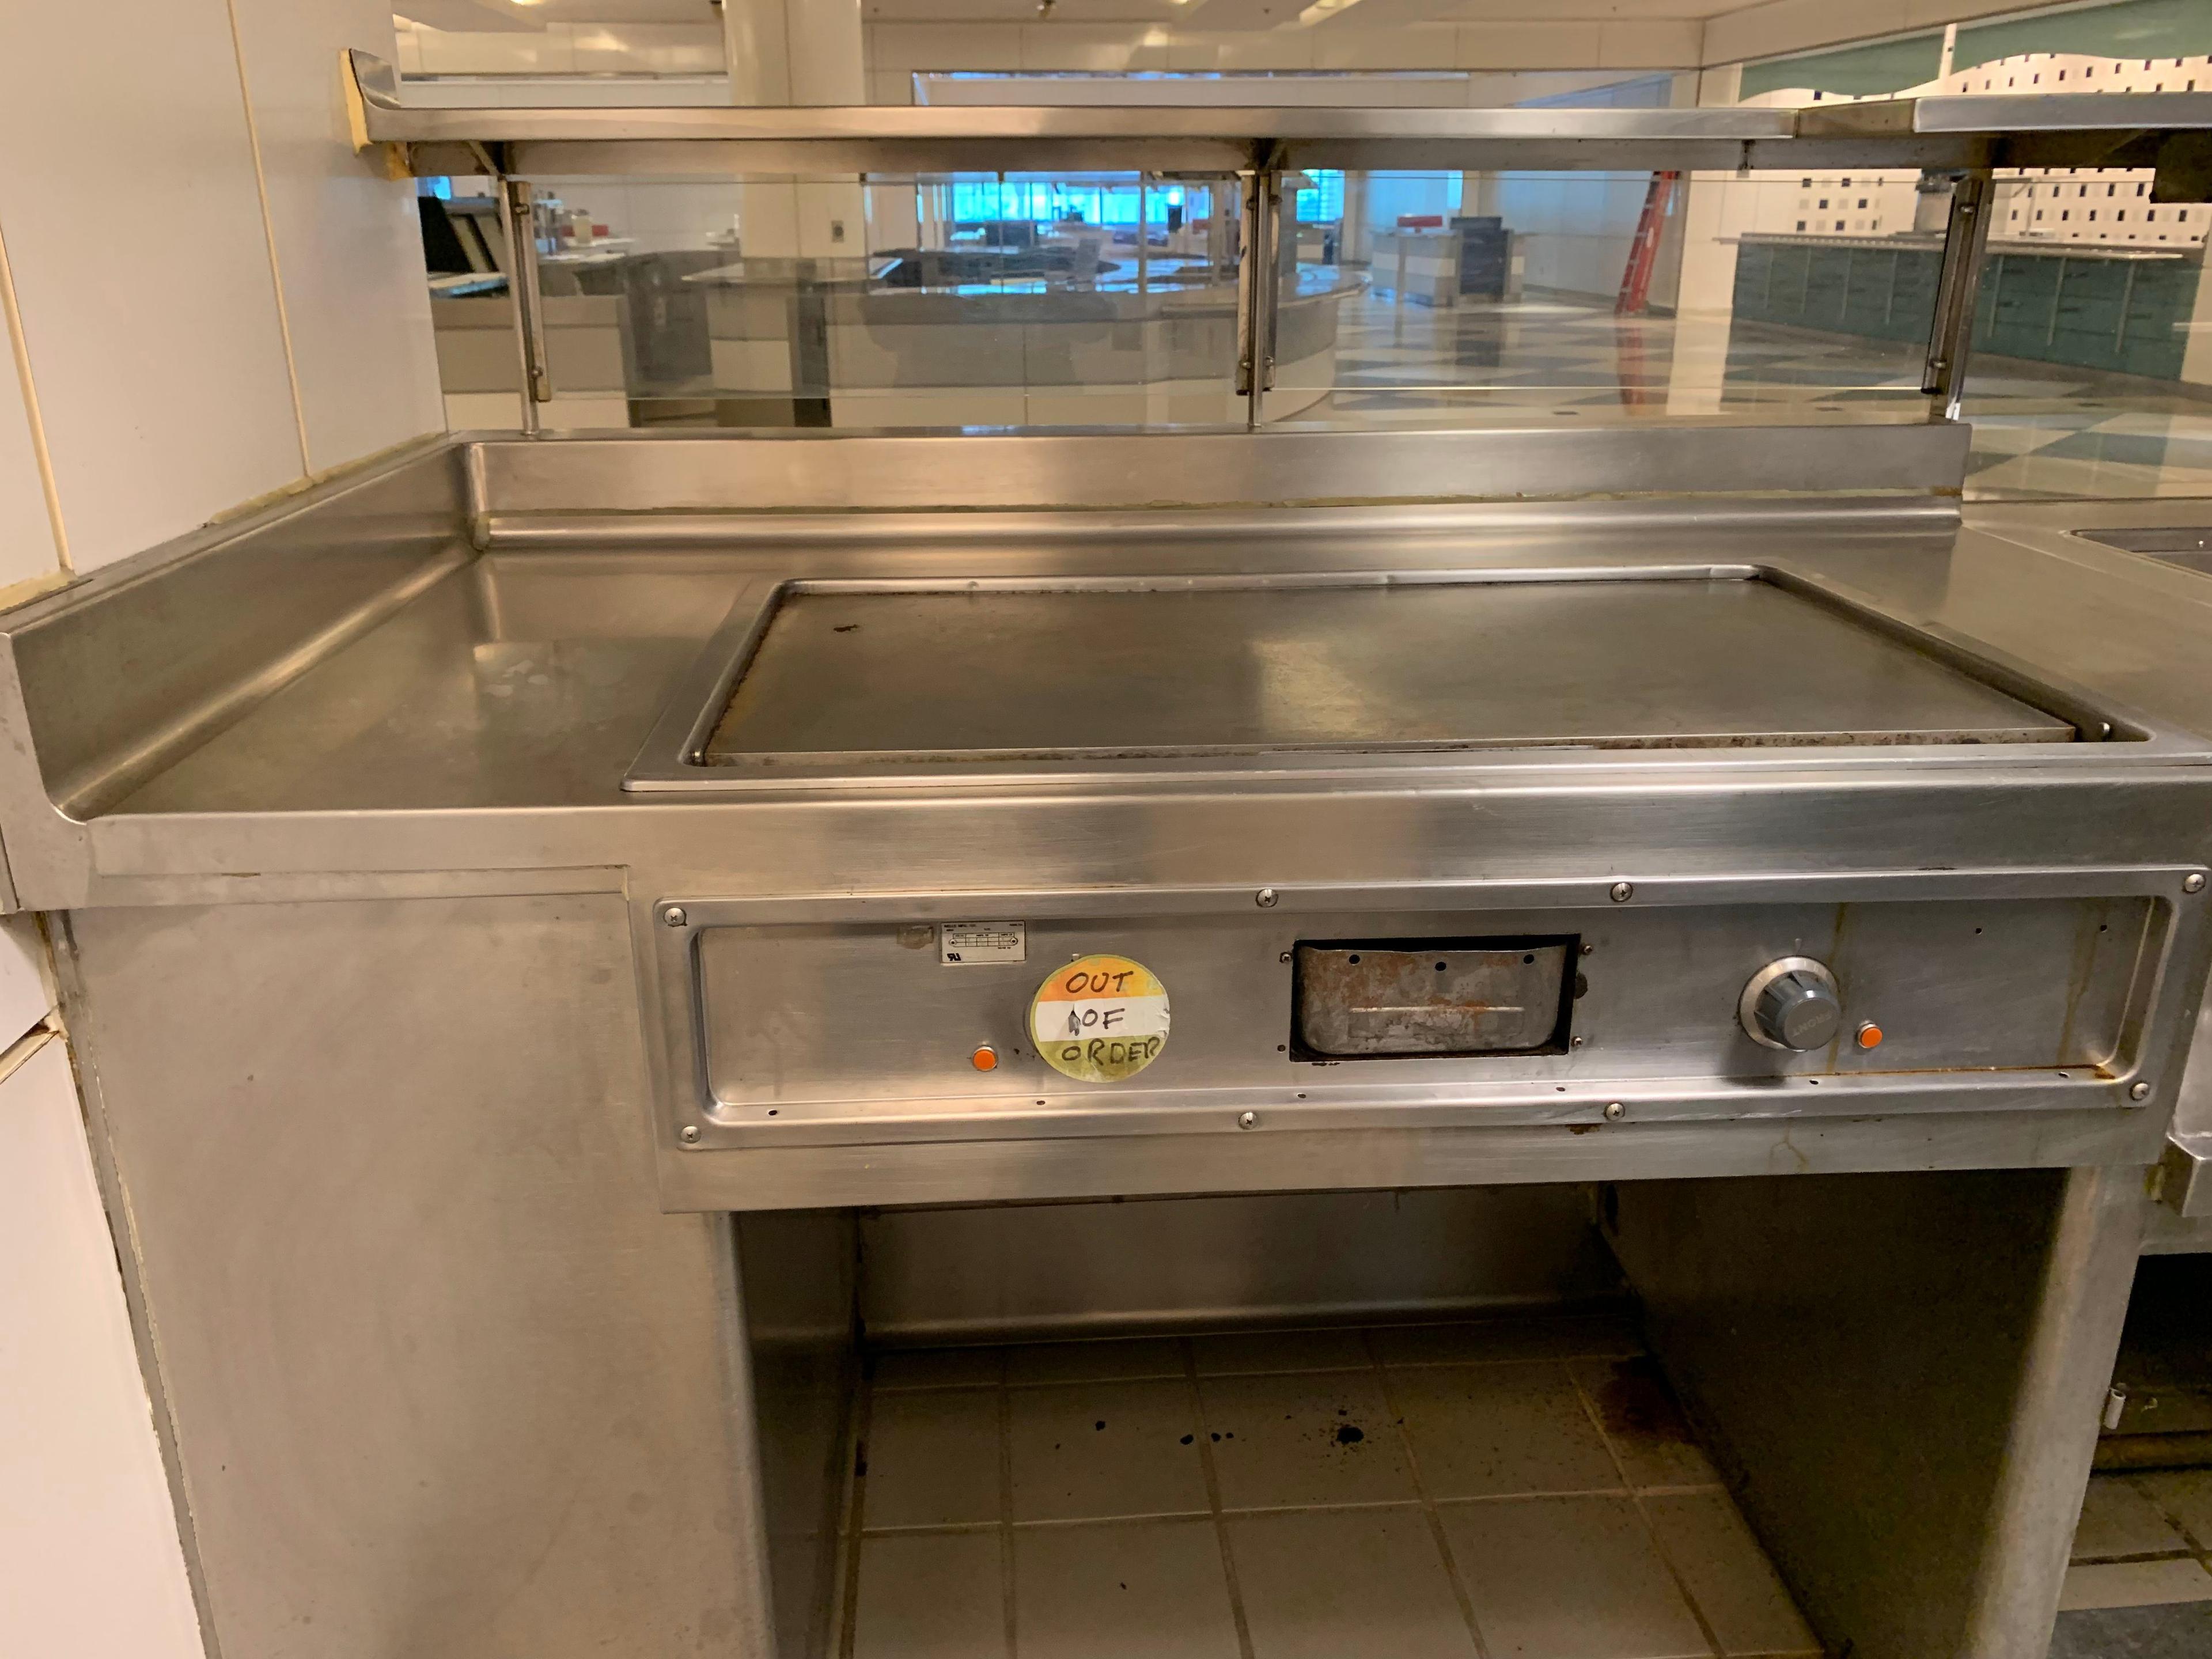 28"2 CAFETERIA COUNTER WITH GRIDDLE THAT NEEDS REPAIR, 6 HOT WELLS, 36" ICE